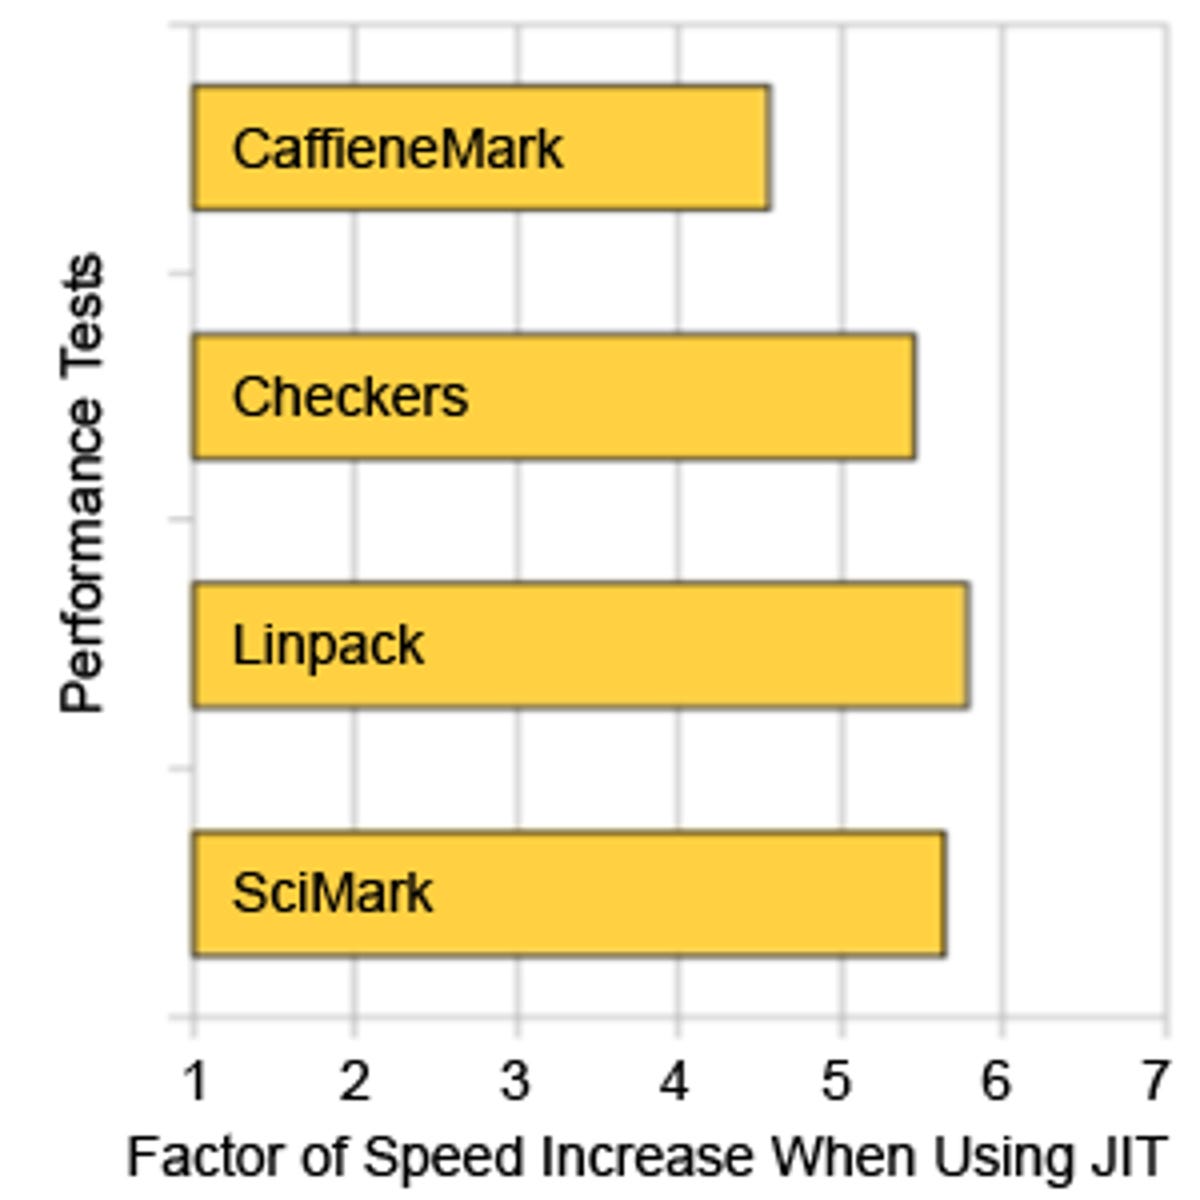 This chart shows the factor by which Android 2.2 exceeds 2.1 on various speed tests.